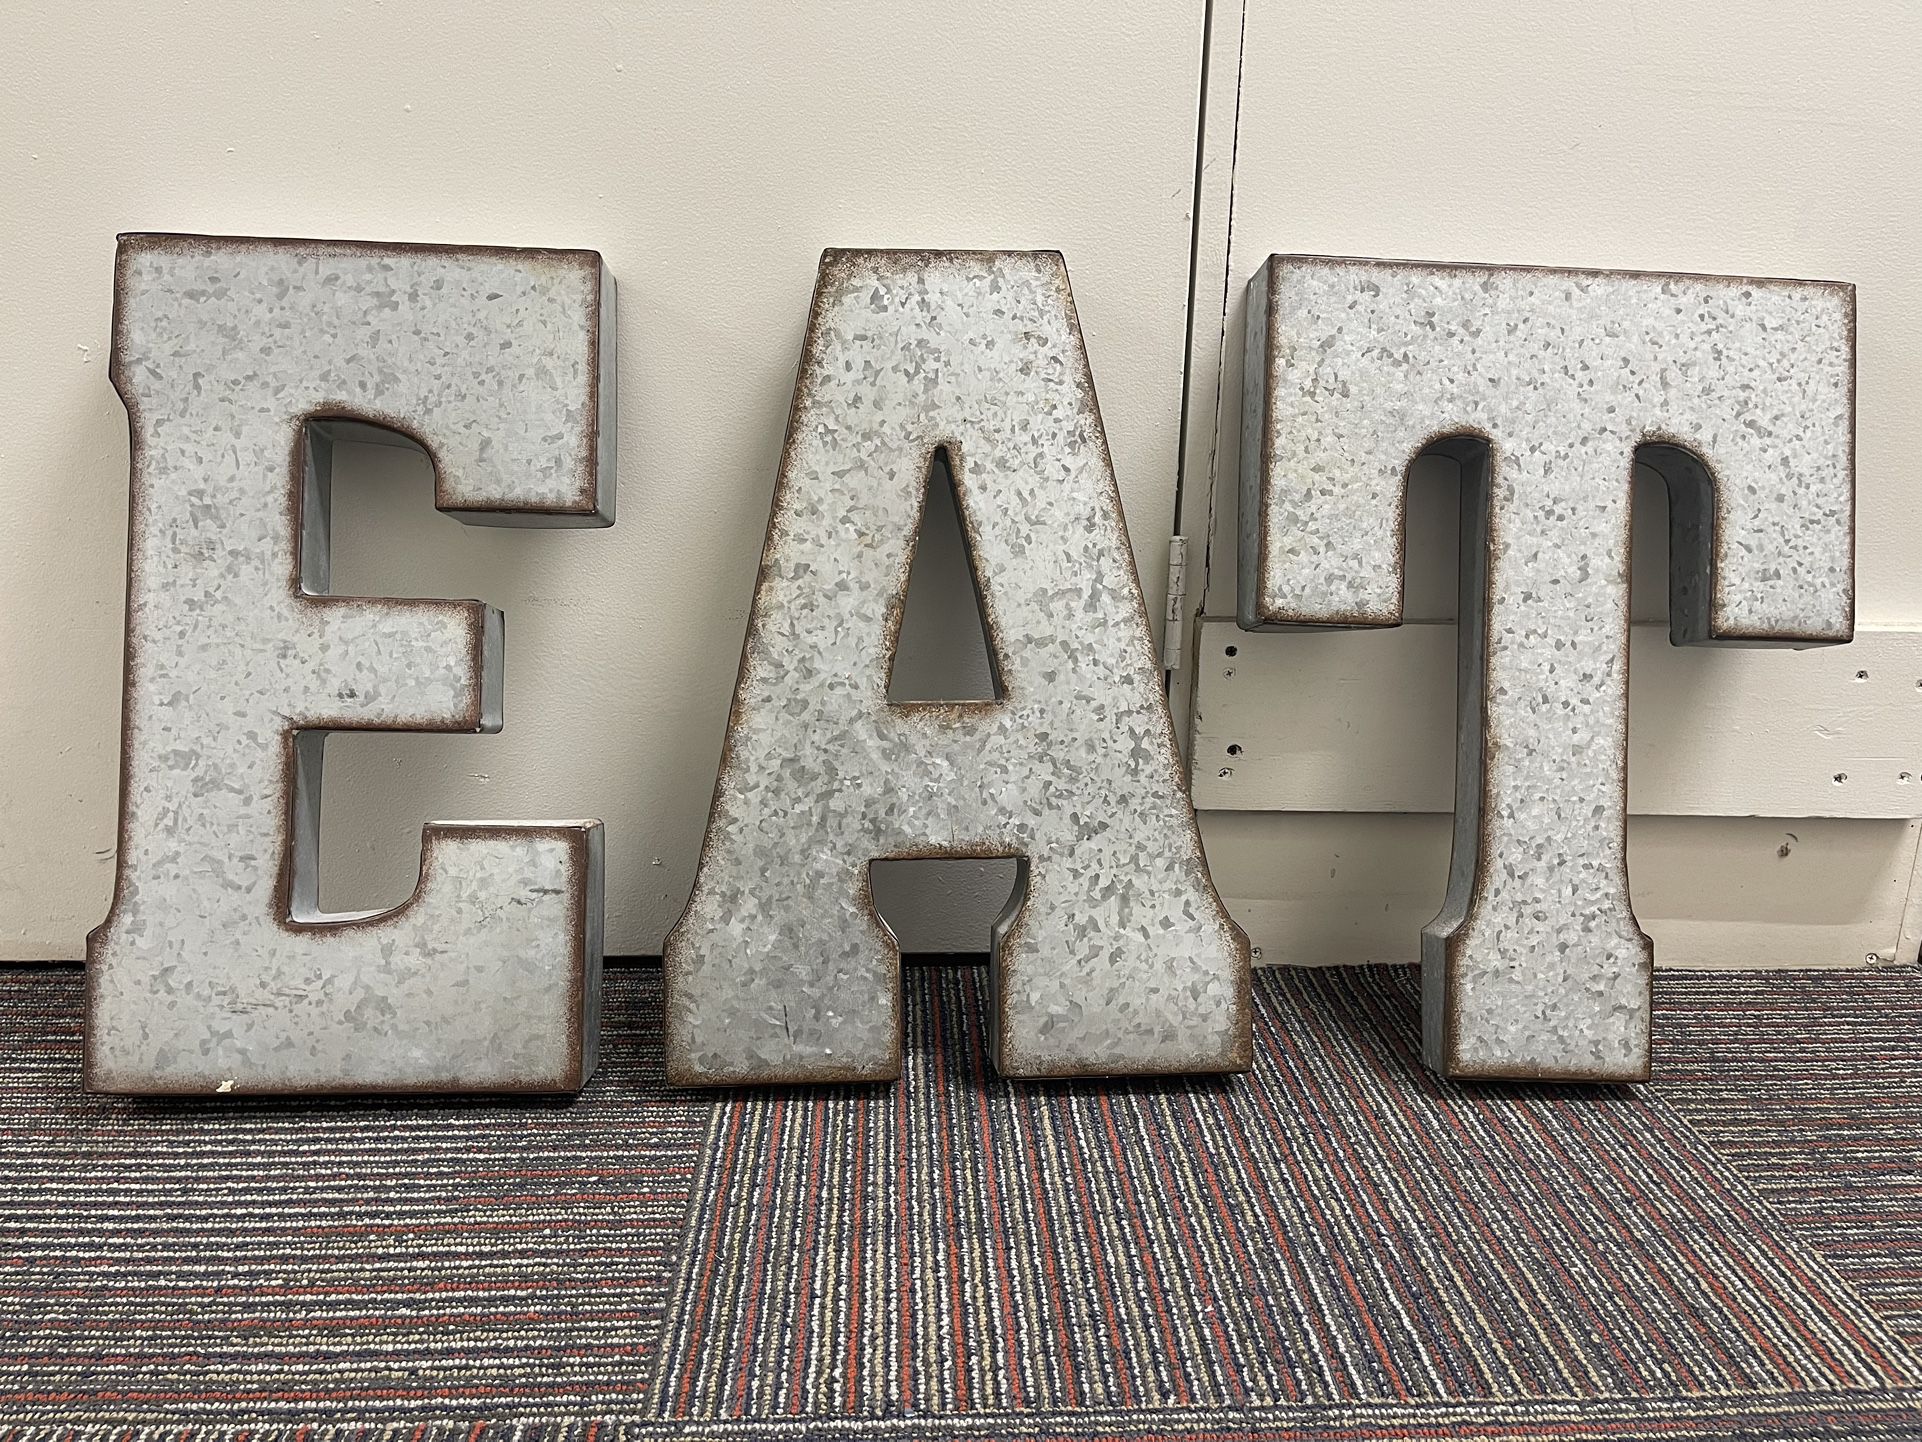 Large Metal Wall Letters